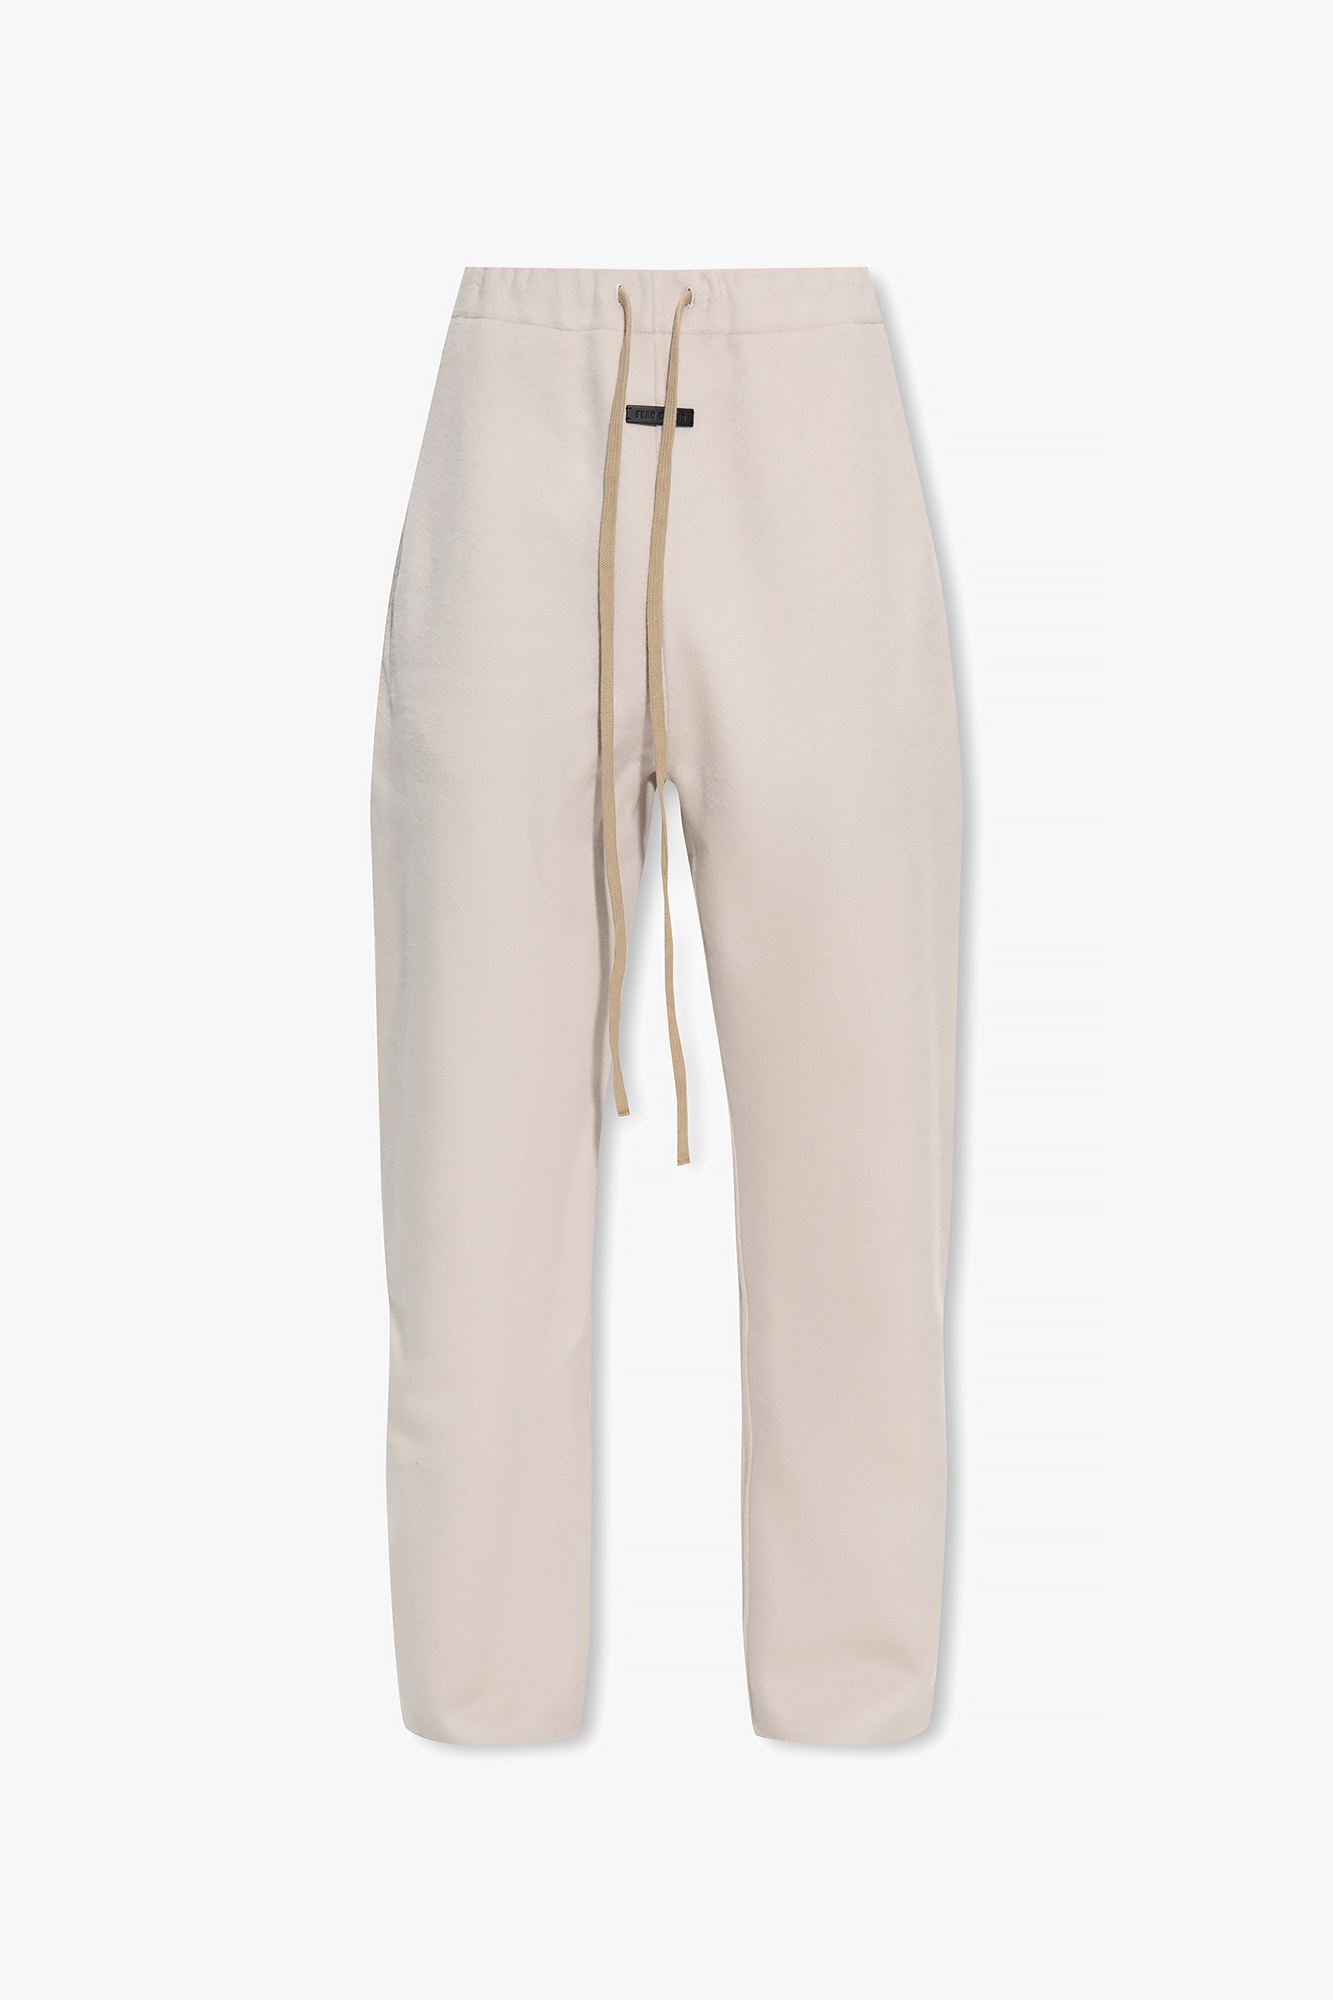 Athletics Higher Learning Legging Wool trousers